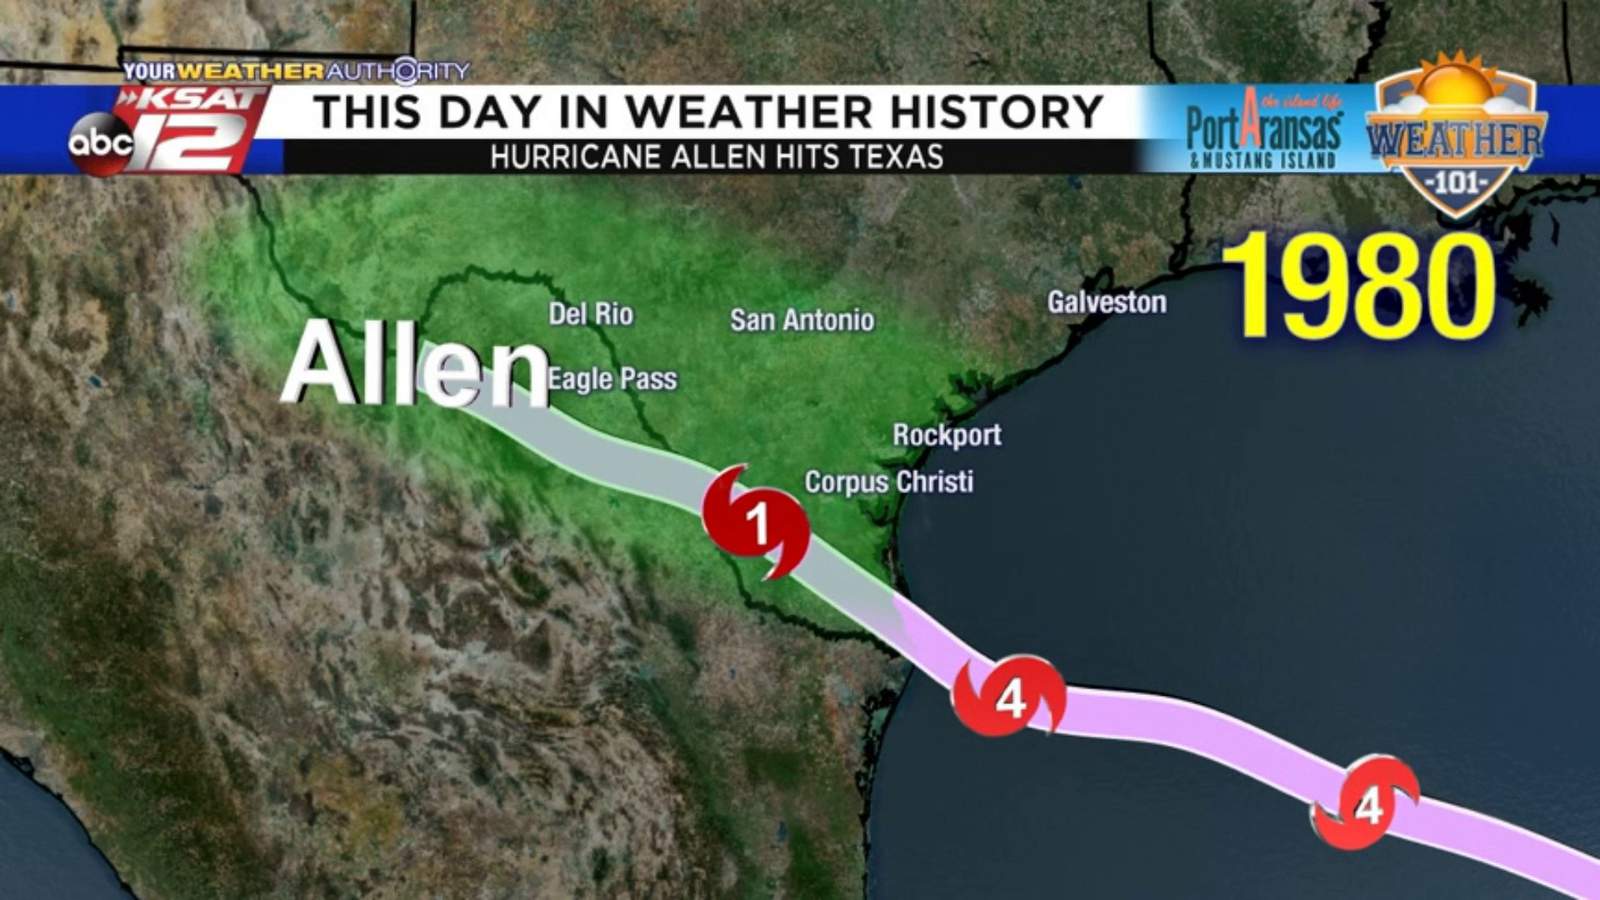 This Day in Weather History: August 10th